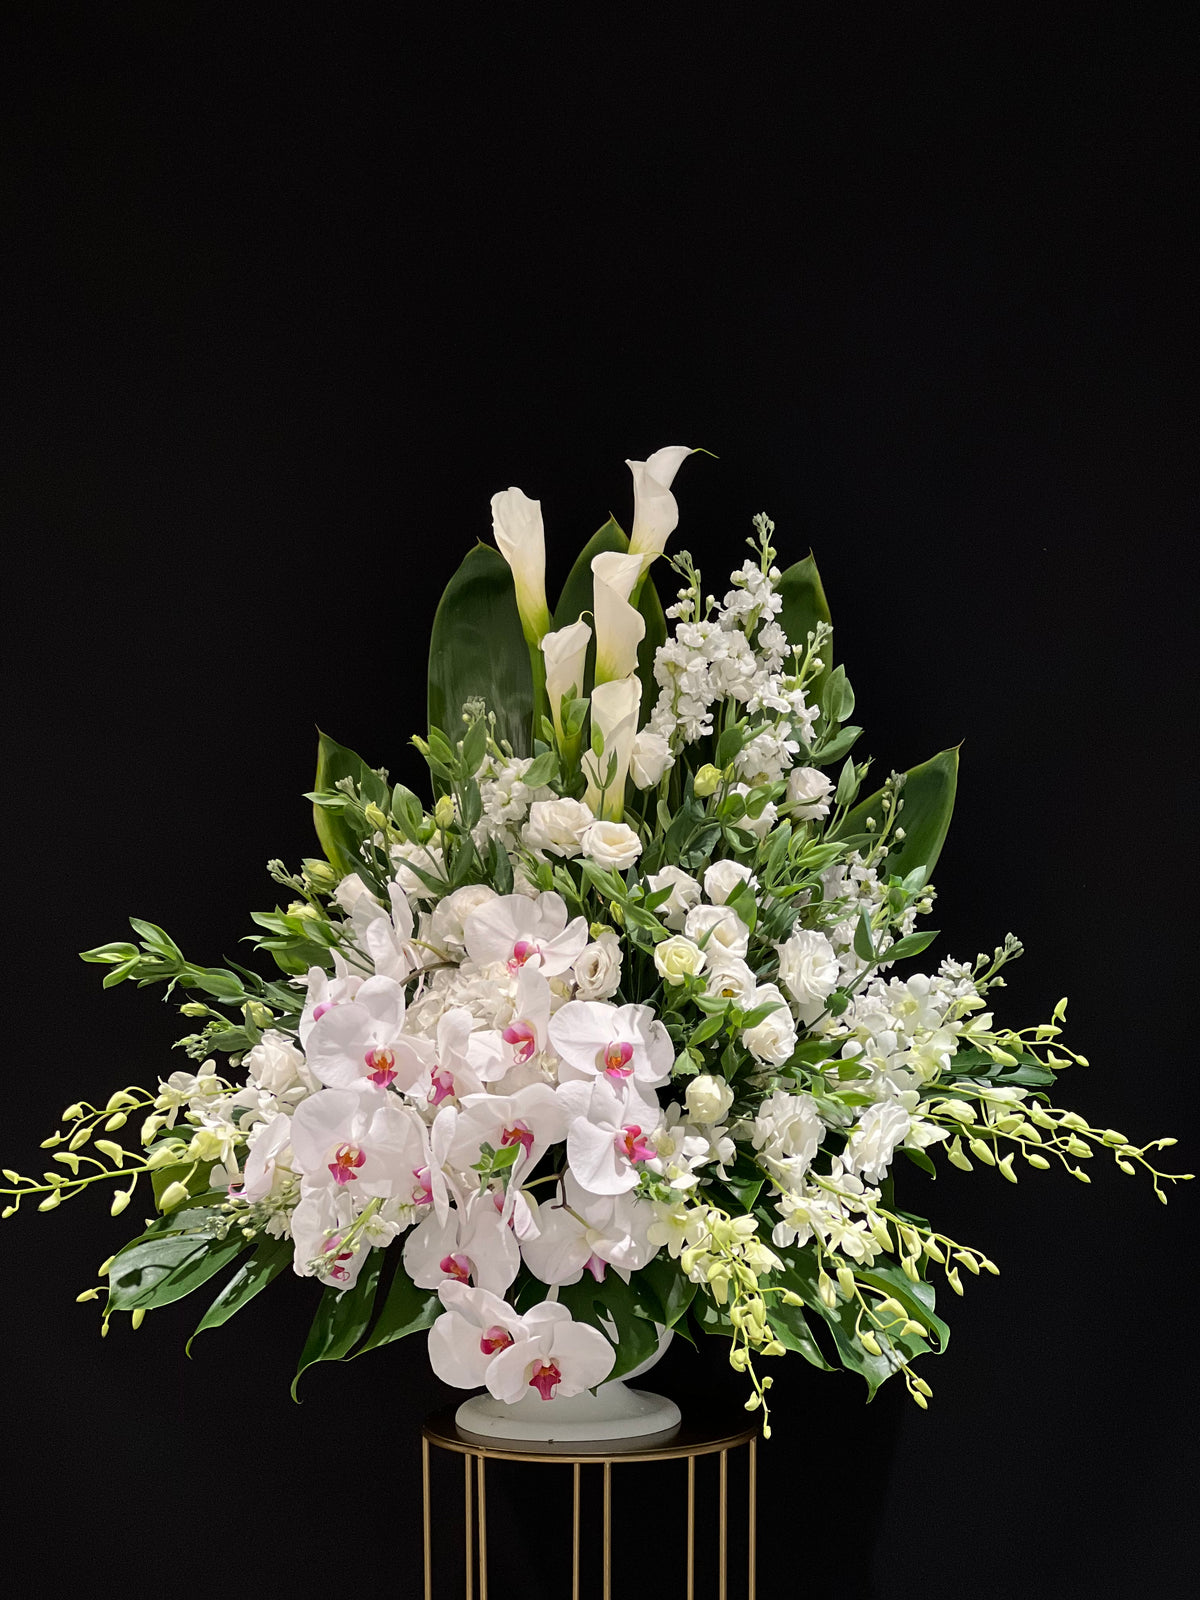 Angelic White Funeral Basket Arrangement: A serene and elegant tribute with white Calla Lilies, Stocks, Roses, Lisianthus, and Dendrobium Orchids, beautifully accented with Phalaenopsis Orchids.